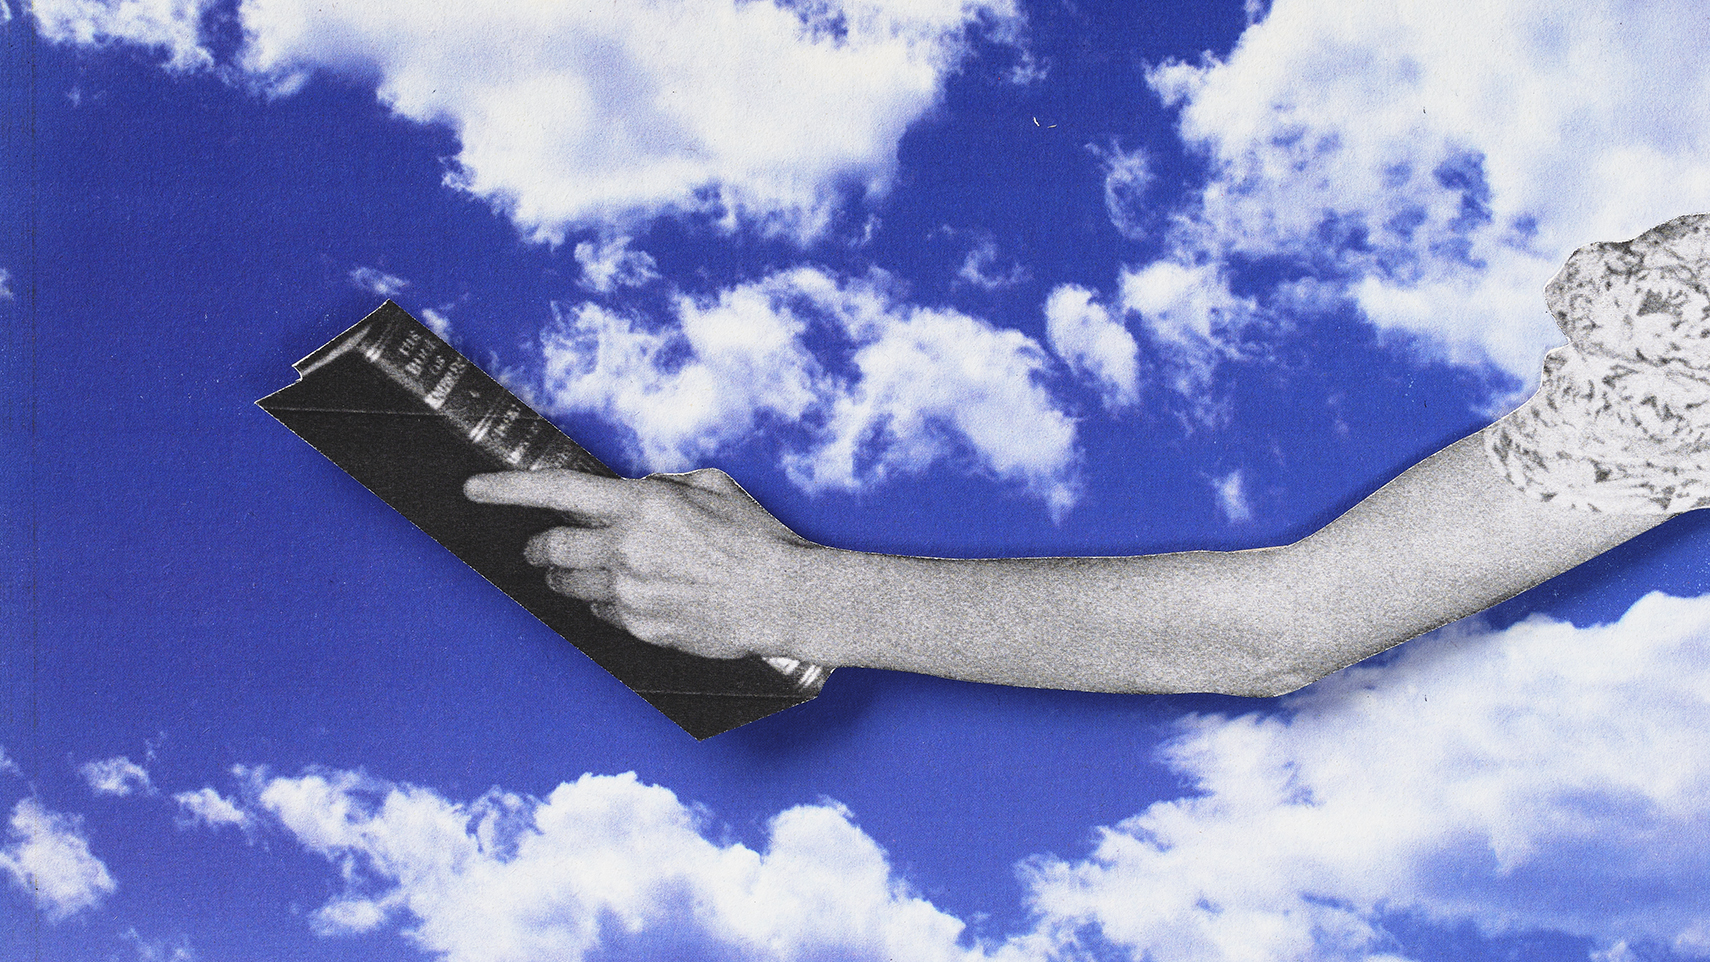 An arm holding a book, reaching into a cloudy sky